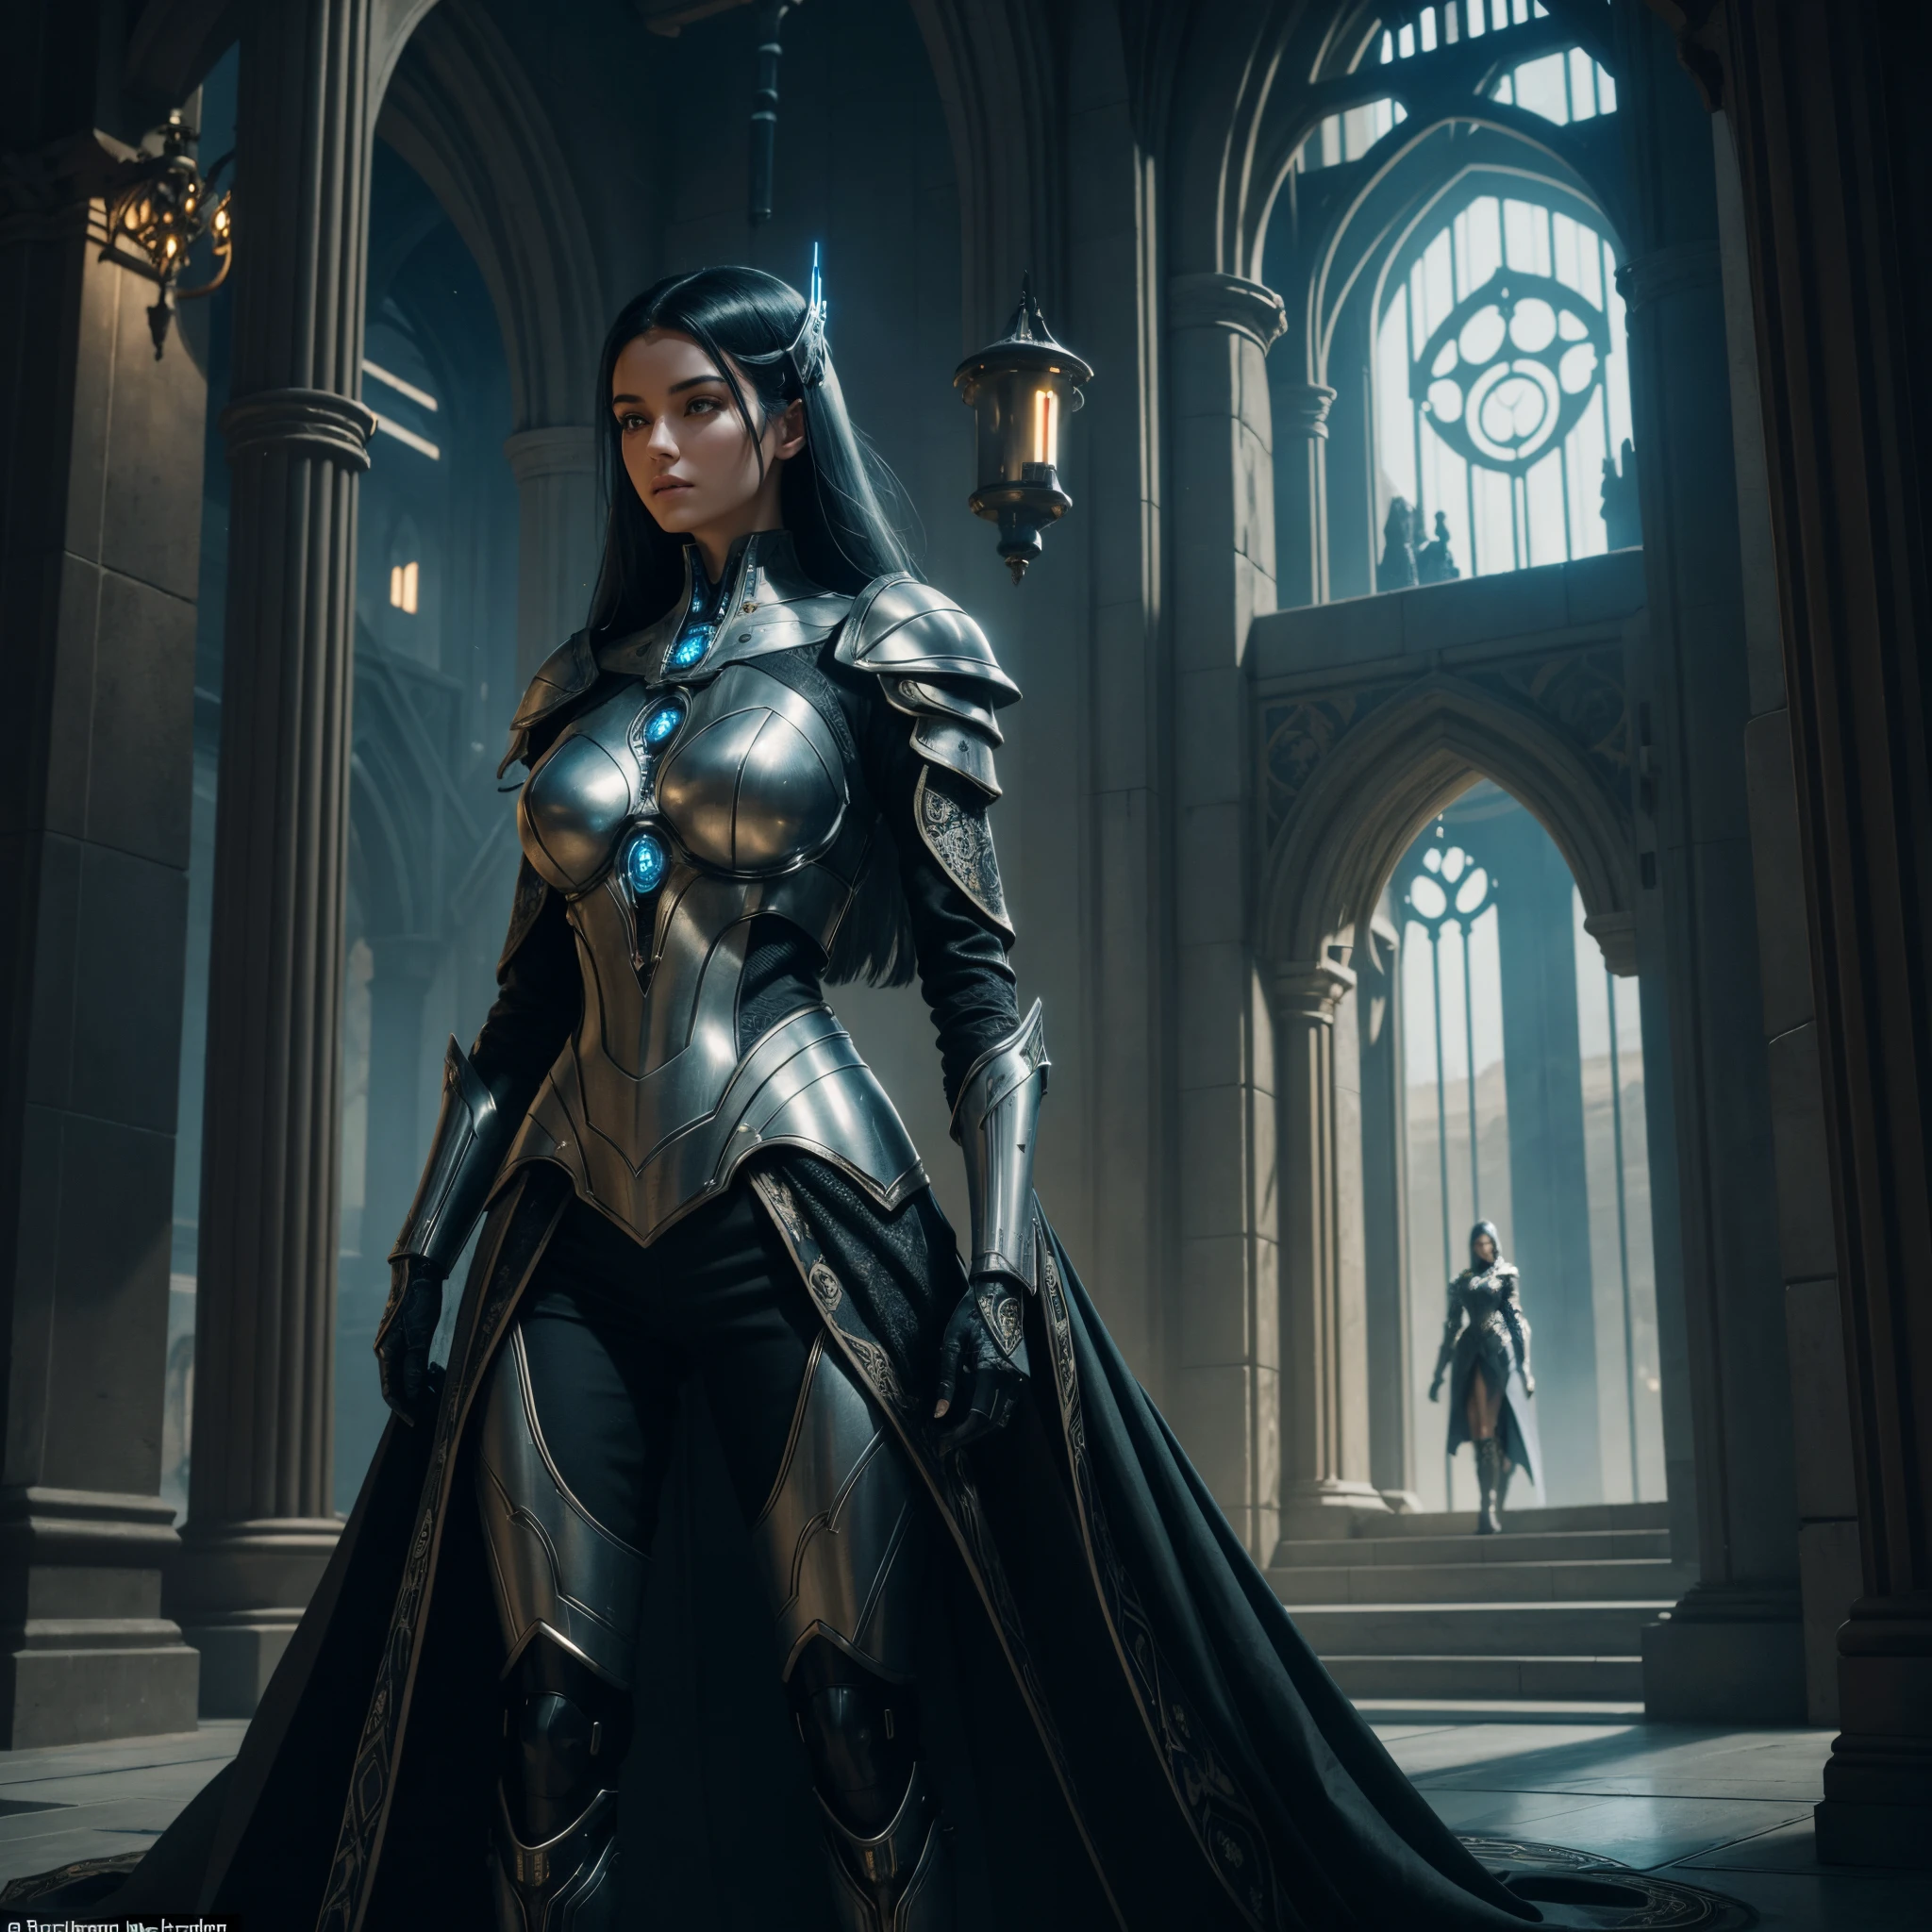 A woman with cybernetic enhancements and a medieval gown stands in a futuristic castle courtyard. Her eyes glow with advanced technology, revealing intricate circuits and delicate wiring. Enhanced with futuristic armor, she wields a laser sword with precision. The castle is a mix of medieval architecture and high-tech elements, with holographic displays and floating orbs illuminating the surroundings. The atmosphere is filled with a sense of mystery and adventure.

Materials used to create this artwork include a combination of digital painting and 3D rendering, resulting in a visually stunning fusion of traditional and futuristic elements. The level of detail is exceptionally high, capturing the intricate textures of both the medieval gown and the cybernetic enhancements. The art style leans towards a photorealistic portrayal, emphasizing the realism and immersive quality of the scene.

Colors in this depiction are vibrant and vivid, invoking a sense of awe and wonder. The lighting is strategically placed to enhance the dramatic elements of the composition, casting intriguing shadows and highlighting the contrast between the medieval and futuristic elements.

Overall, the image is of the best quality, created with ultra-detailed precision. It showcases professional craftsmanship and mastery in the art of blending medieval and sci-fi aesthetics. The final result is a visually striking masterpiece that seamlessly merges the two genres, creating a unique and captivating fusion.